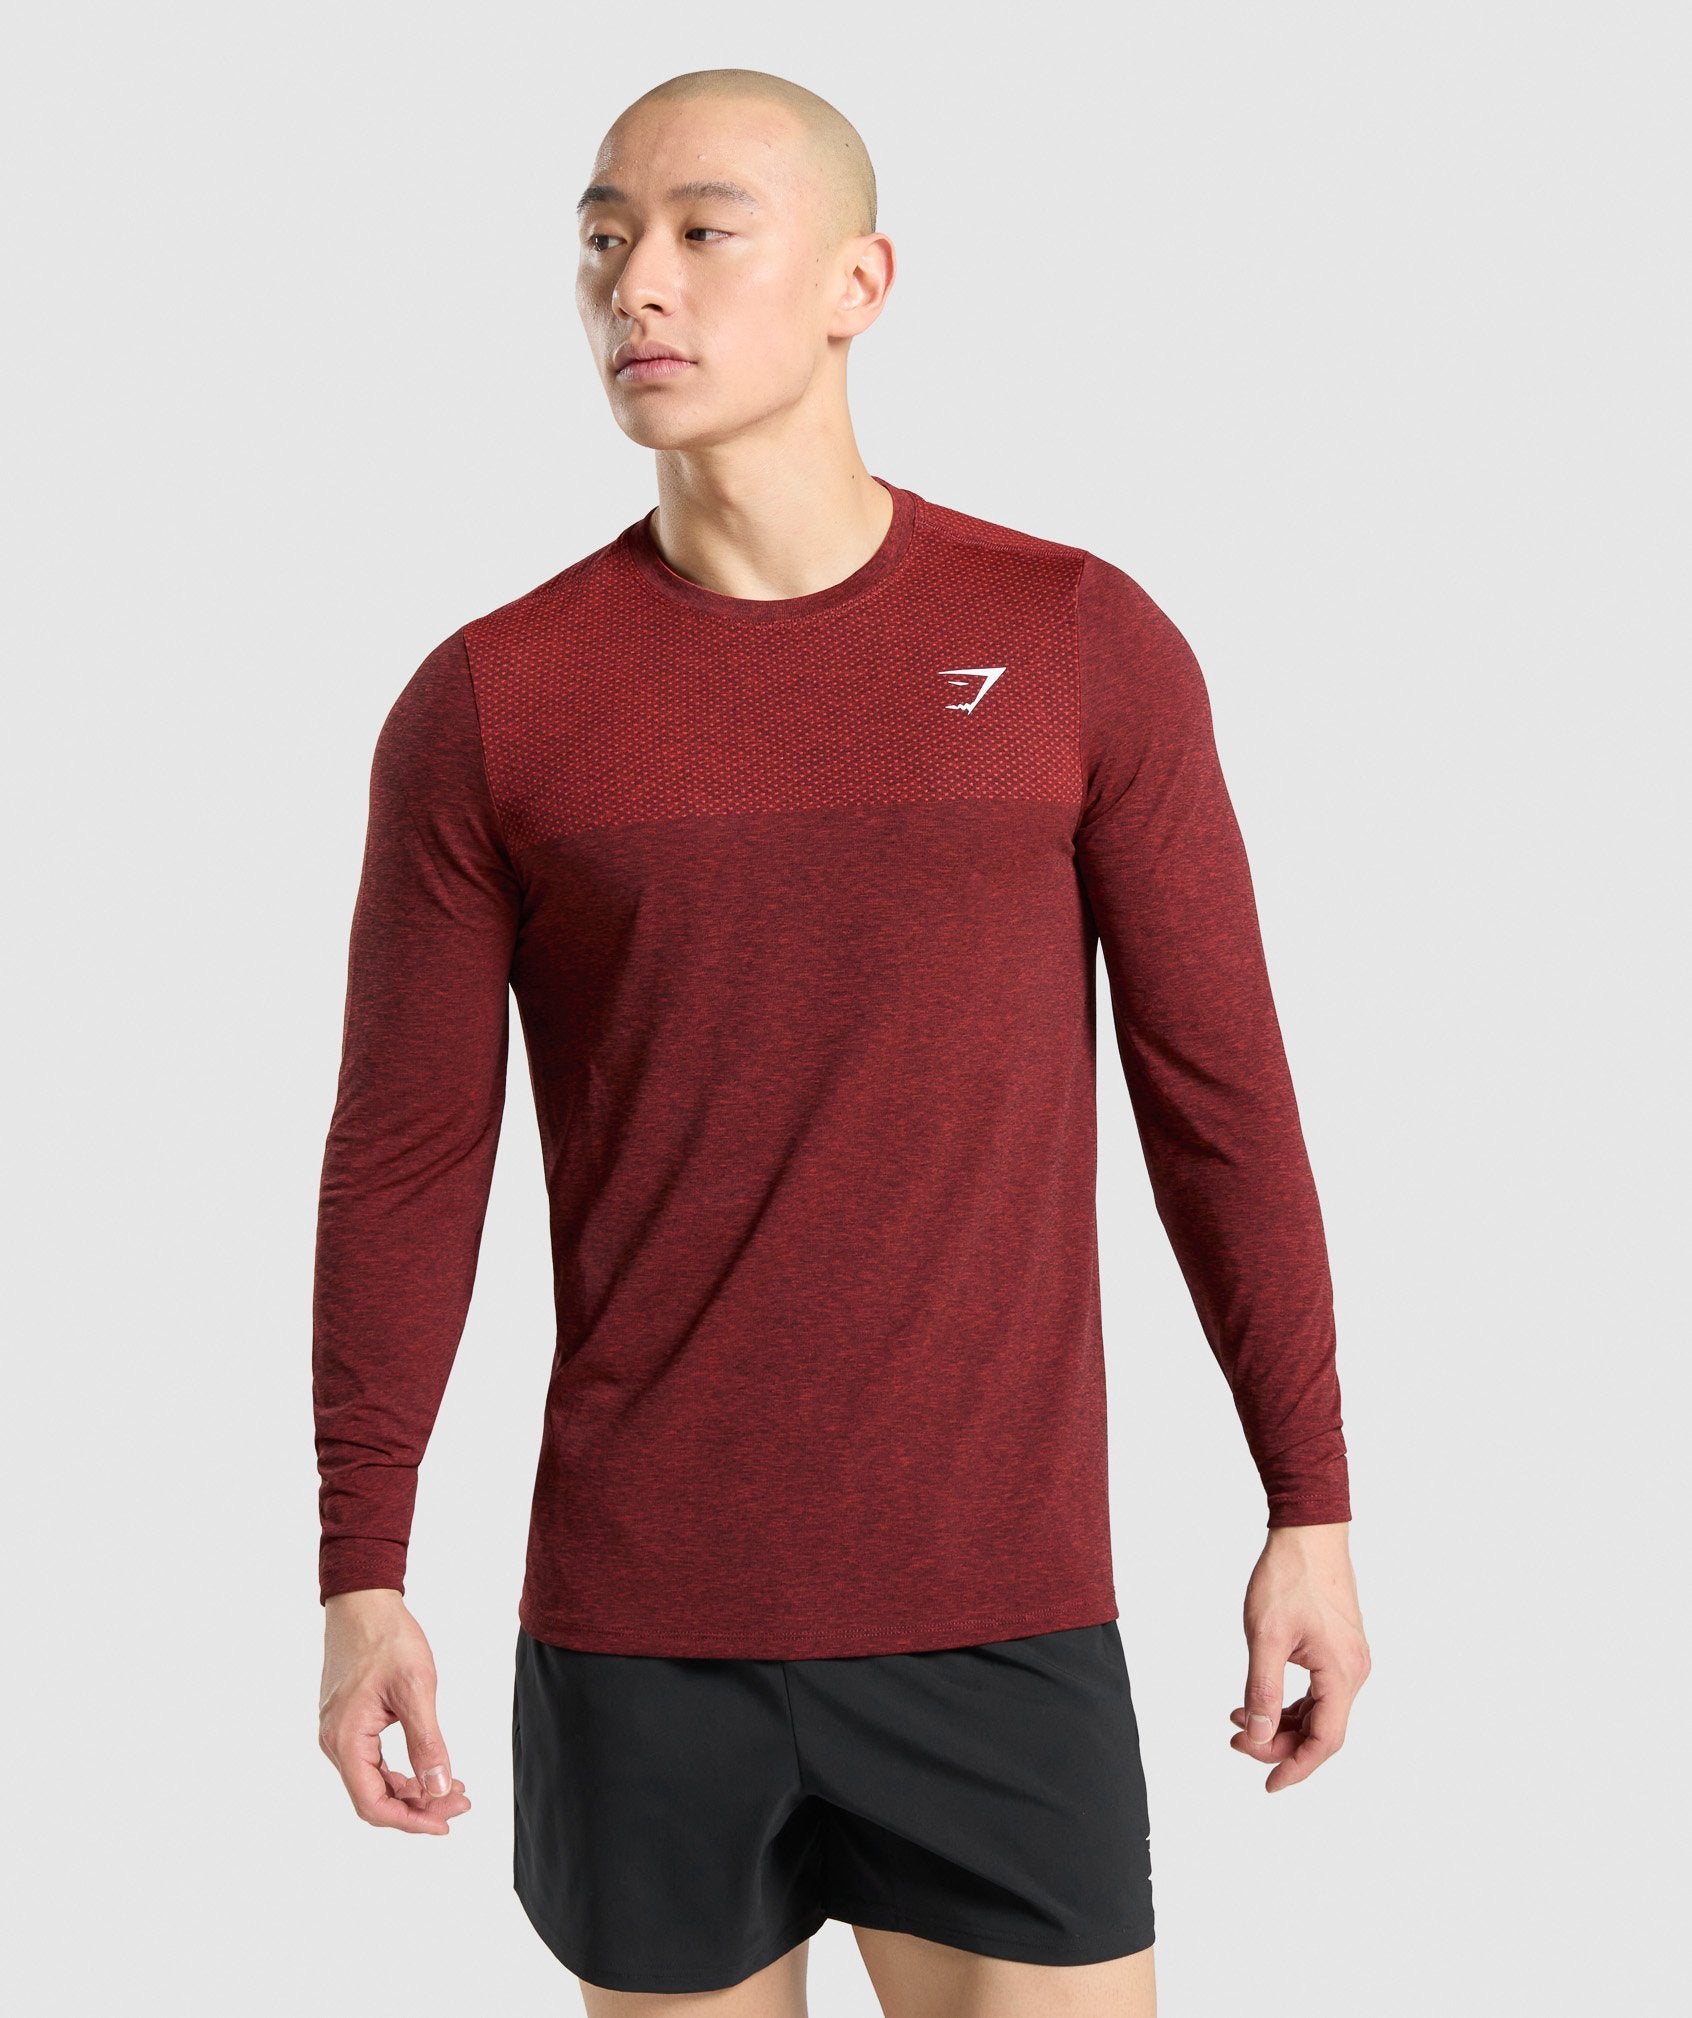 Vital Long Sleeve T-Shirt in Red Marl